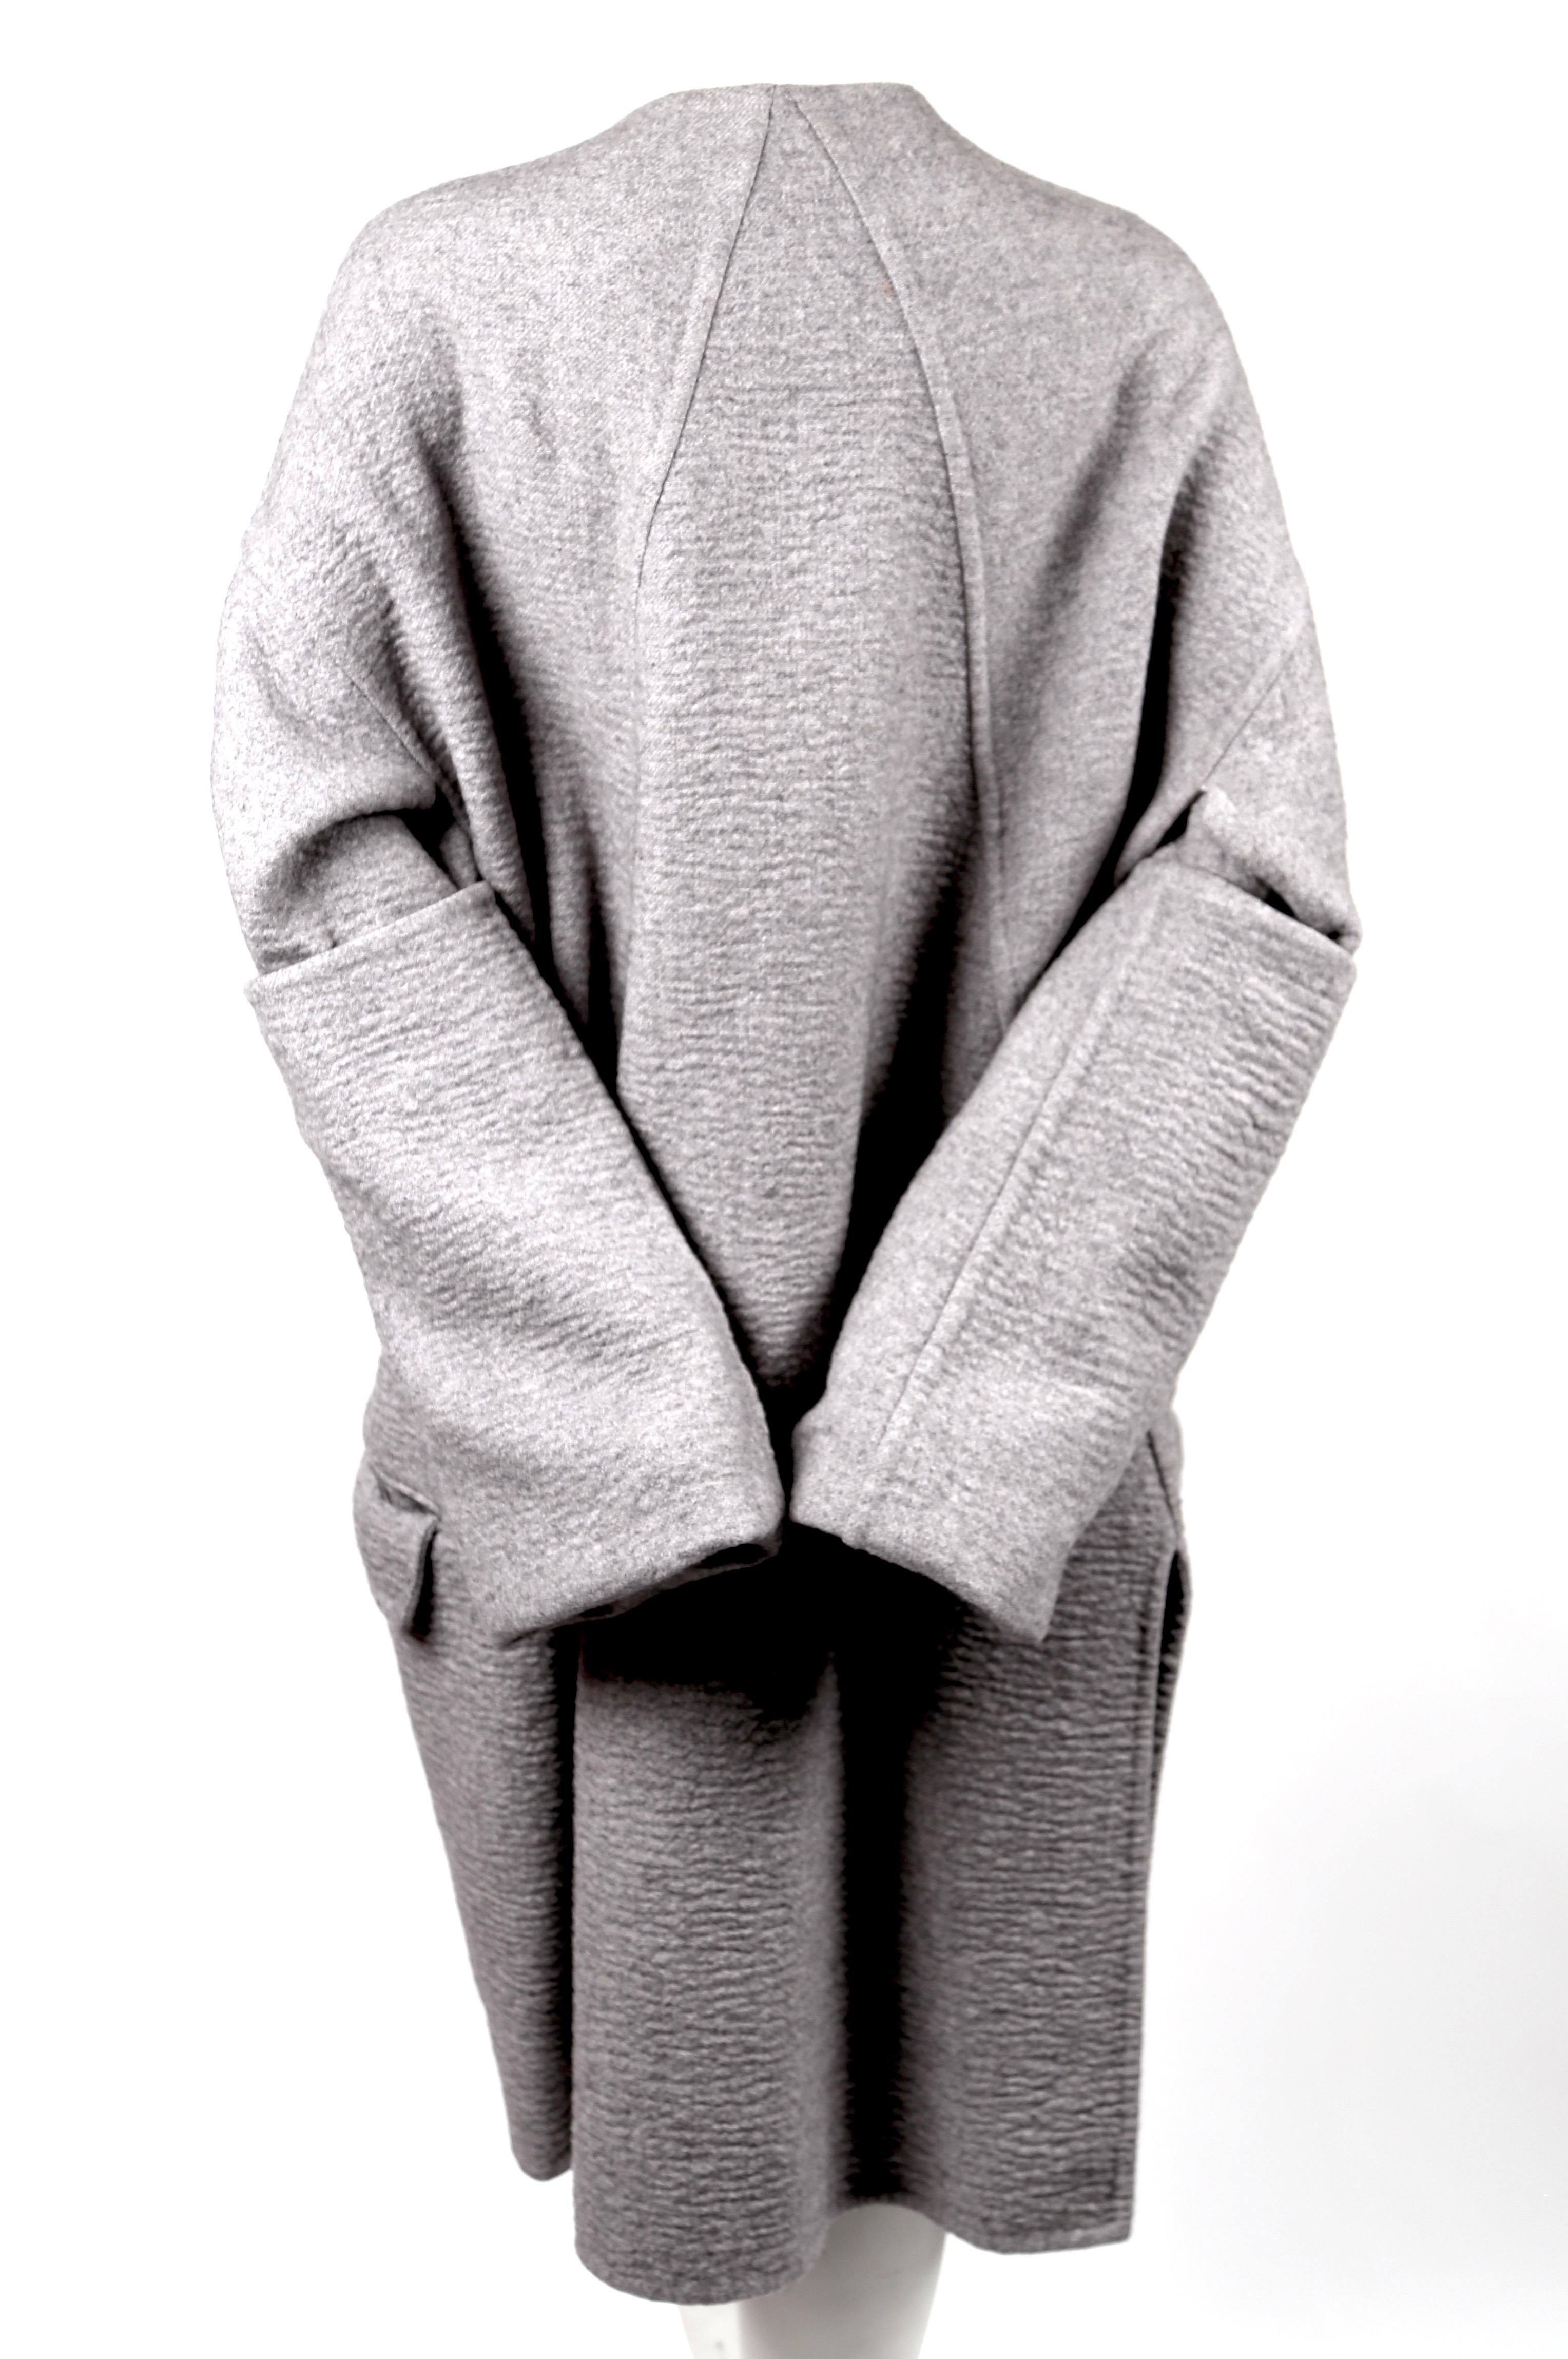 Women's or Men's 2013 CELINE by PHOEBE PHILO grey cashmere runway coat with exaggerated sleeves